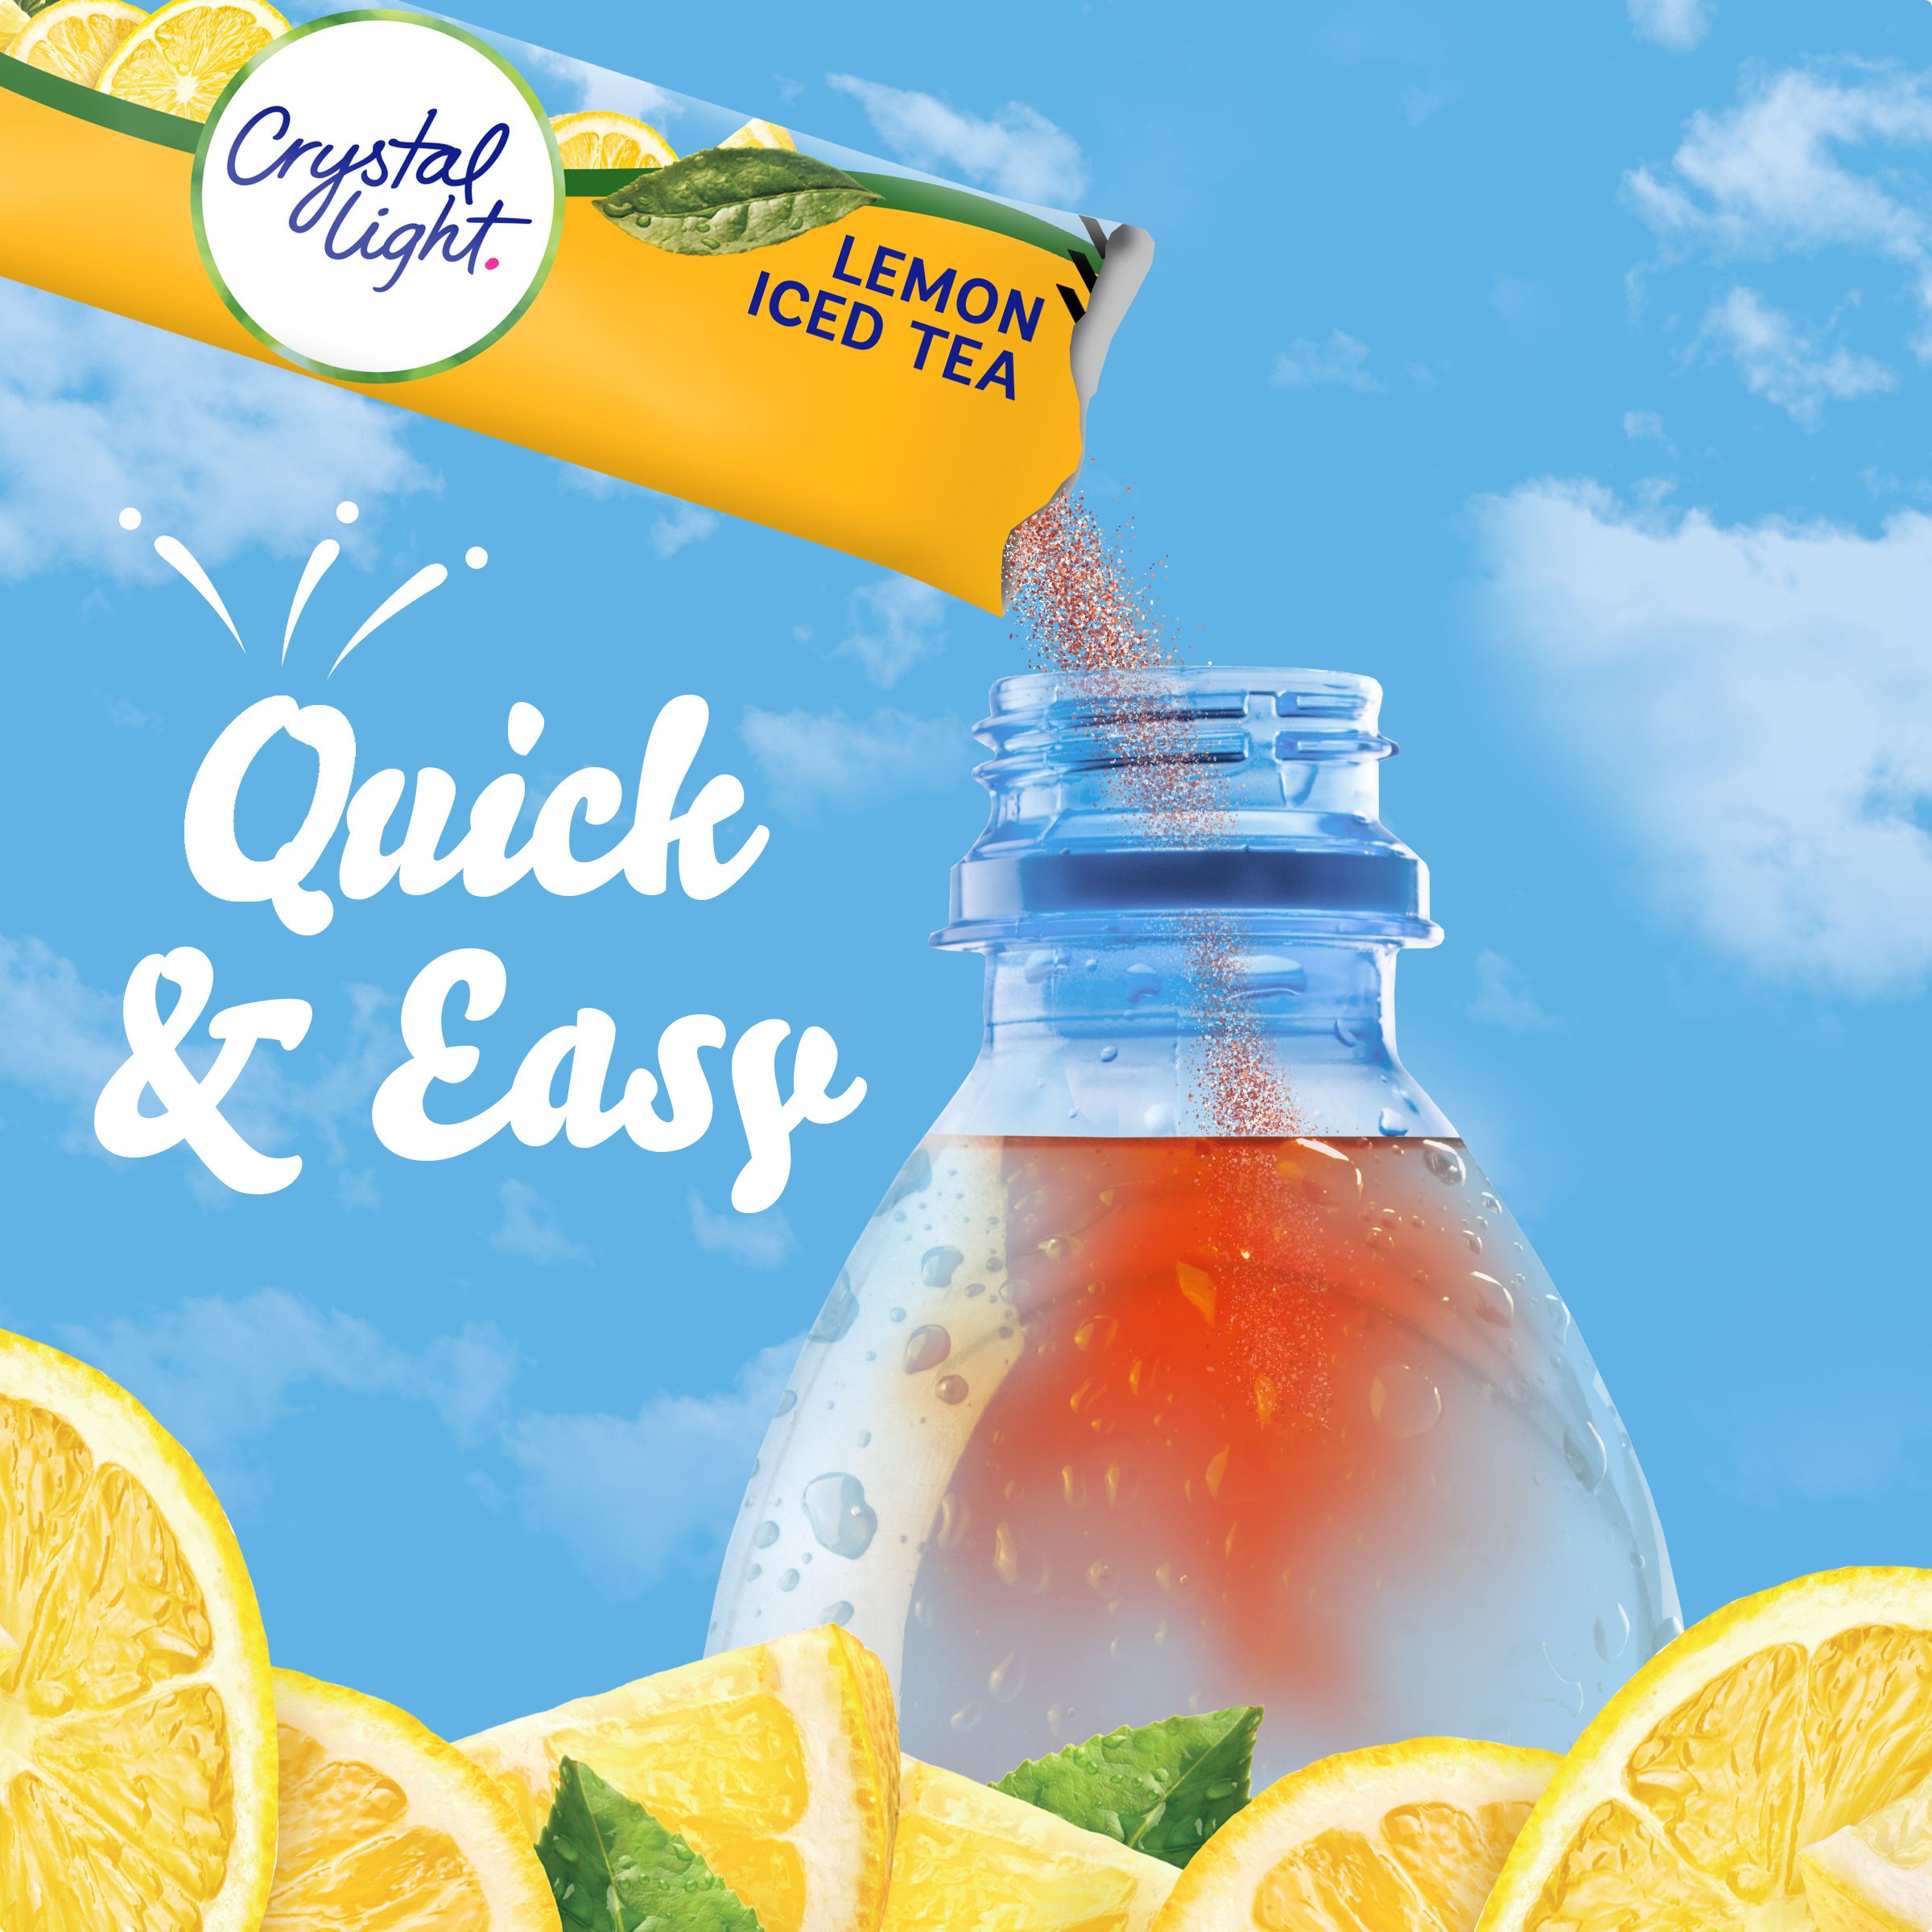 Lemon Iced Tea Naturally Flavored Powdered Drink Mix